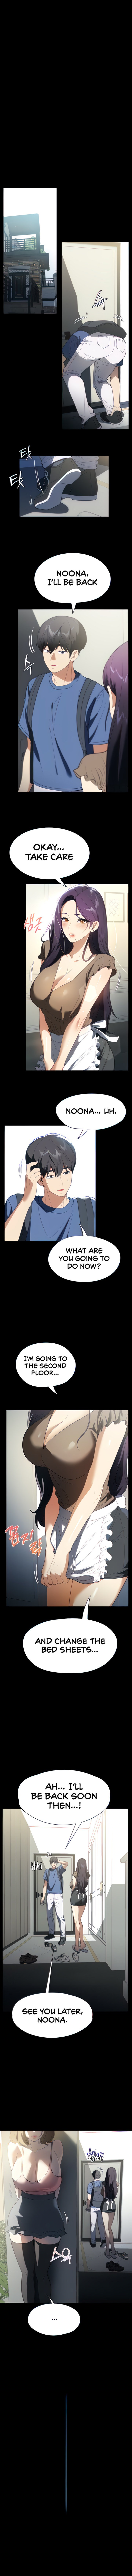 young-housemaid-chap-37-1